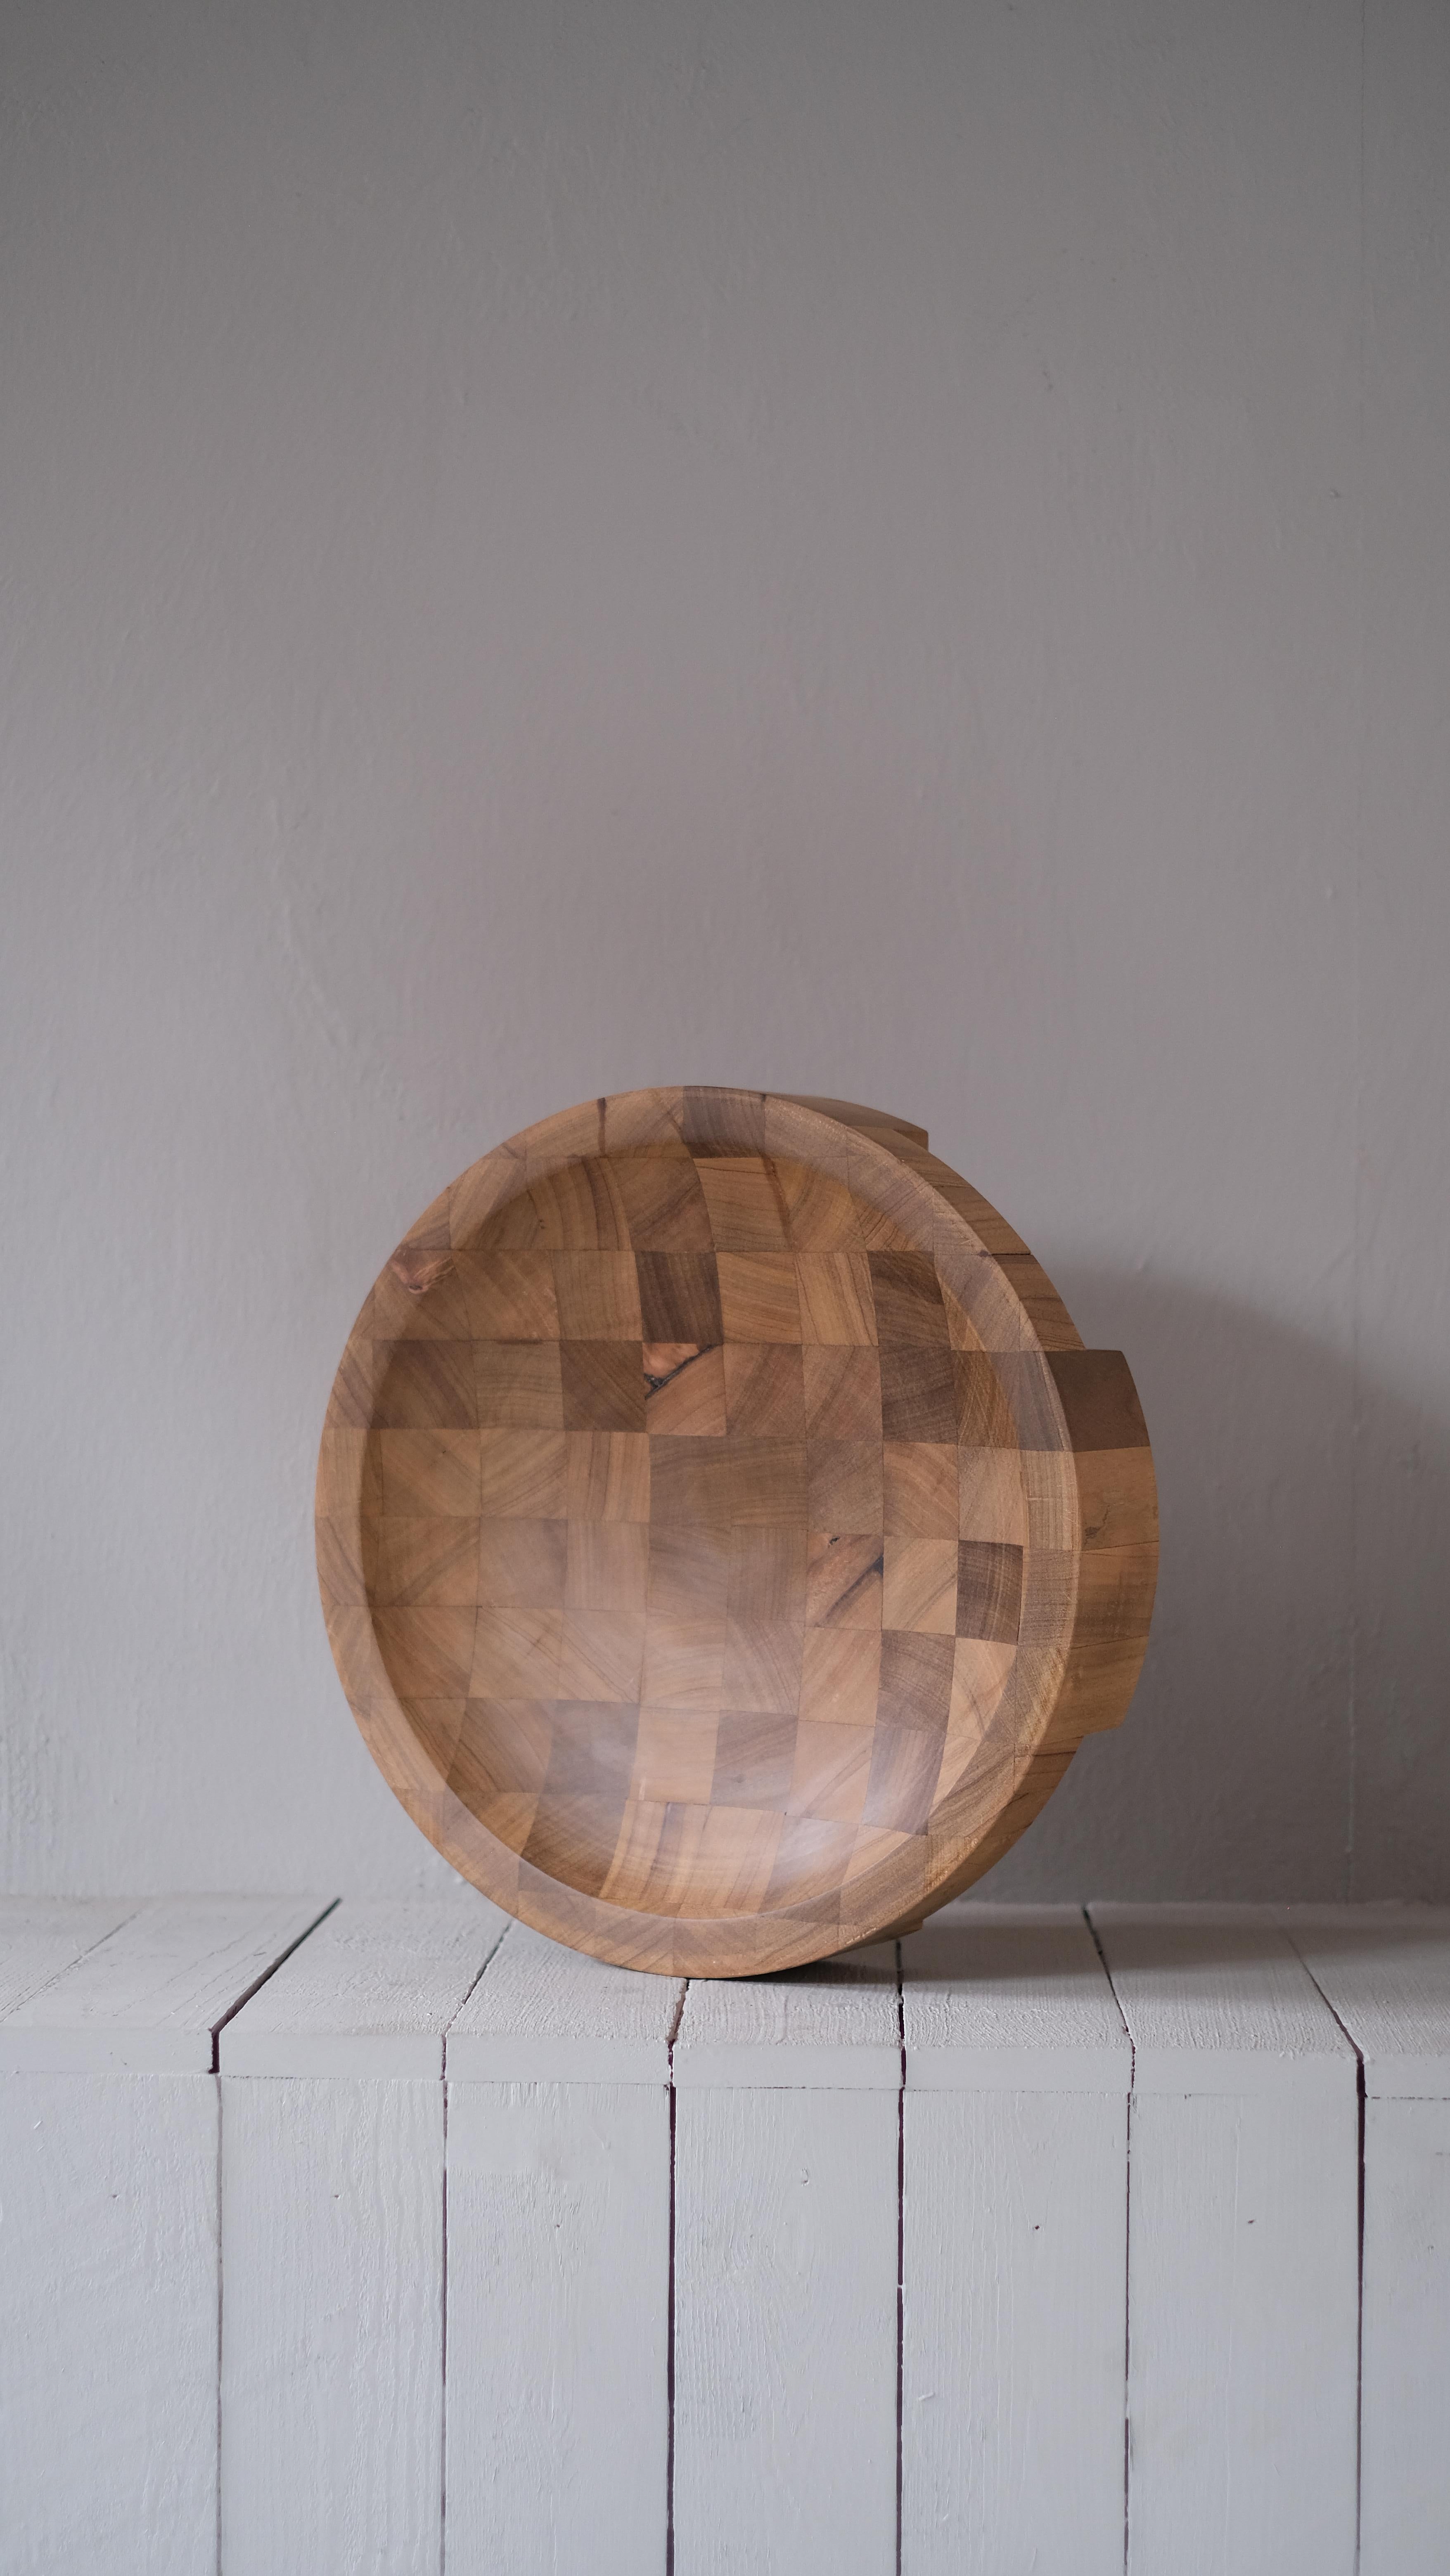 Disk Tray African walnut small by Arno Declercq
Dimensions: D 27 x W 27 x H 9 cm
Meterials: African walnut
Signed by Arno Declercq

Arno Declercq
Belgian designer and art dealer who makes bespoke objects with passion for design, atmosphere,